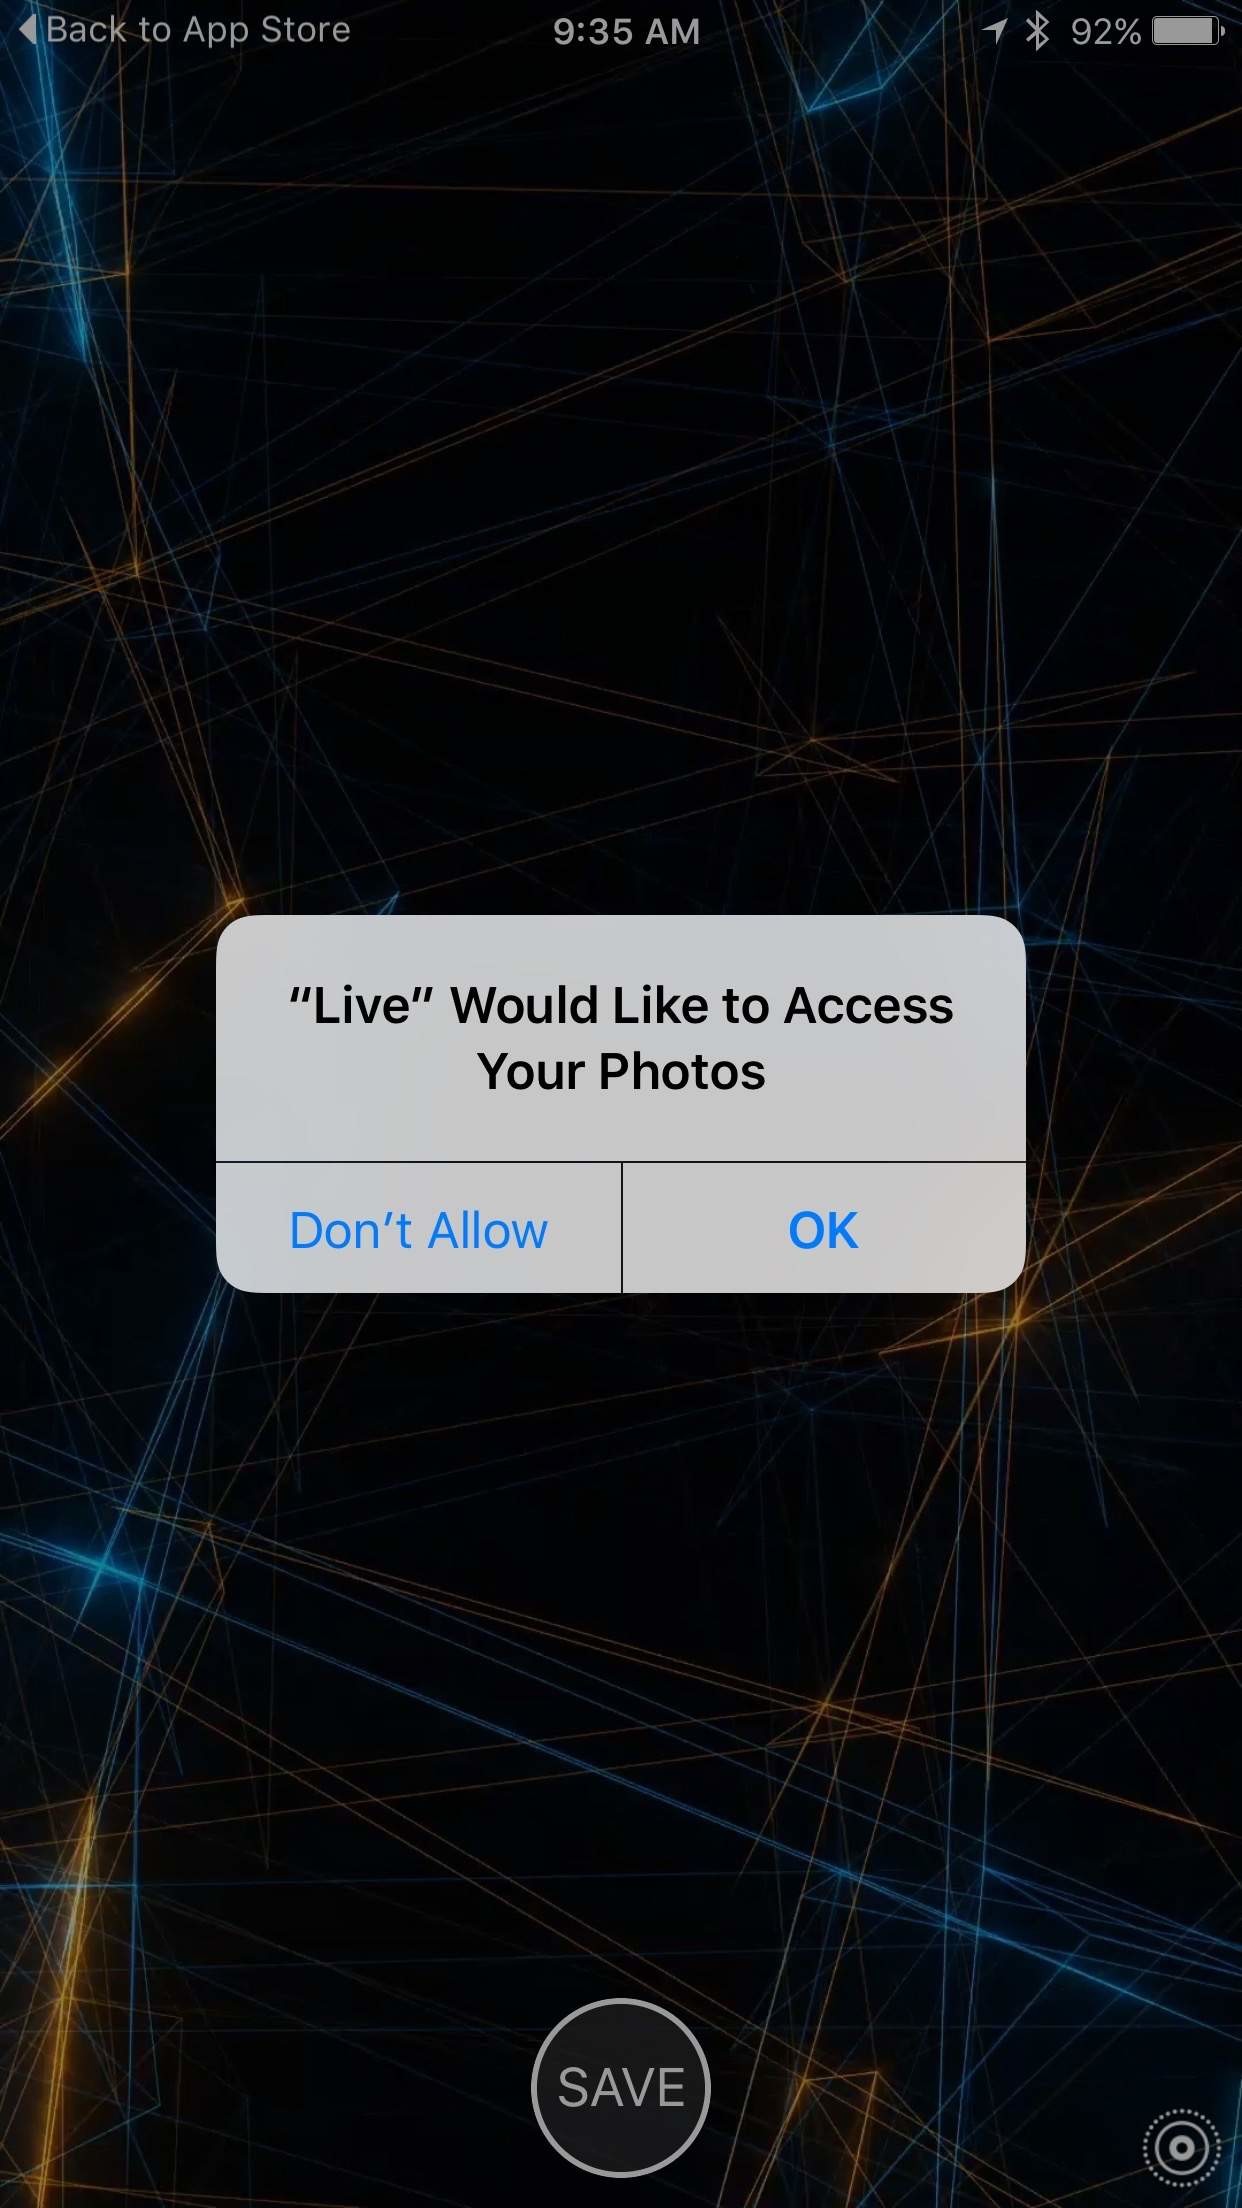 Youll need to give the app permission to access your Photos, and once you do, the animated photo will move to your Camera Roll